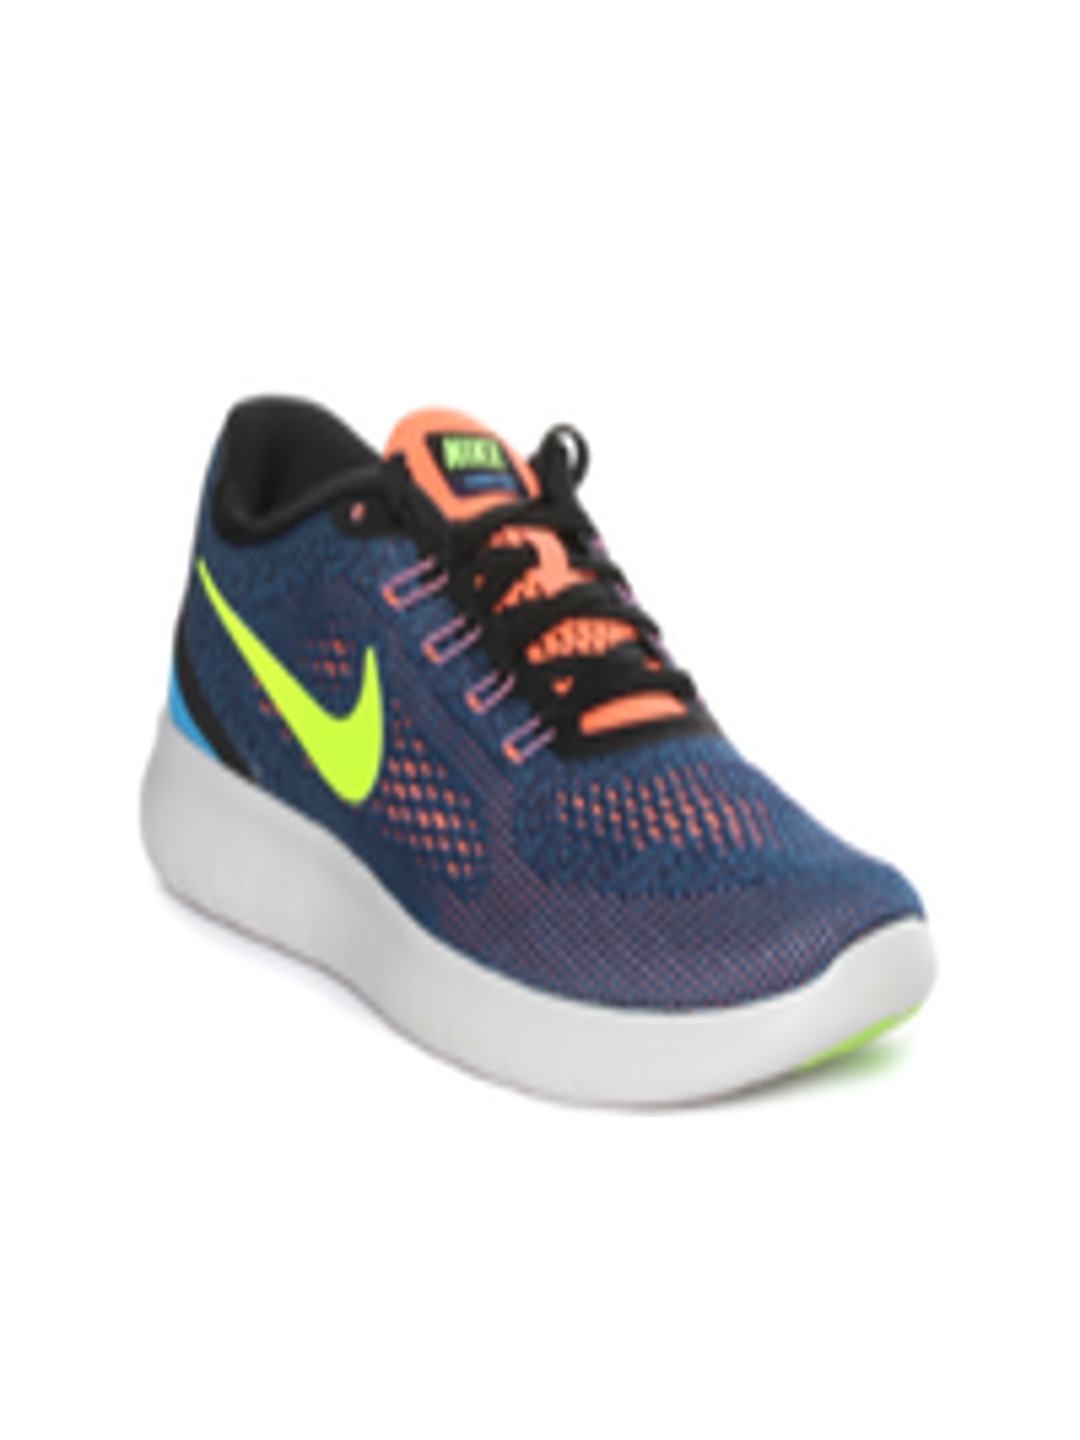 navy blue nike shoes womens